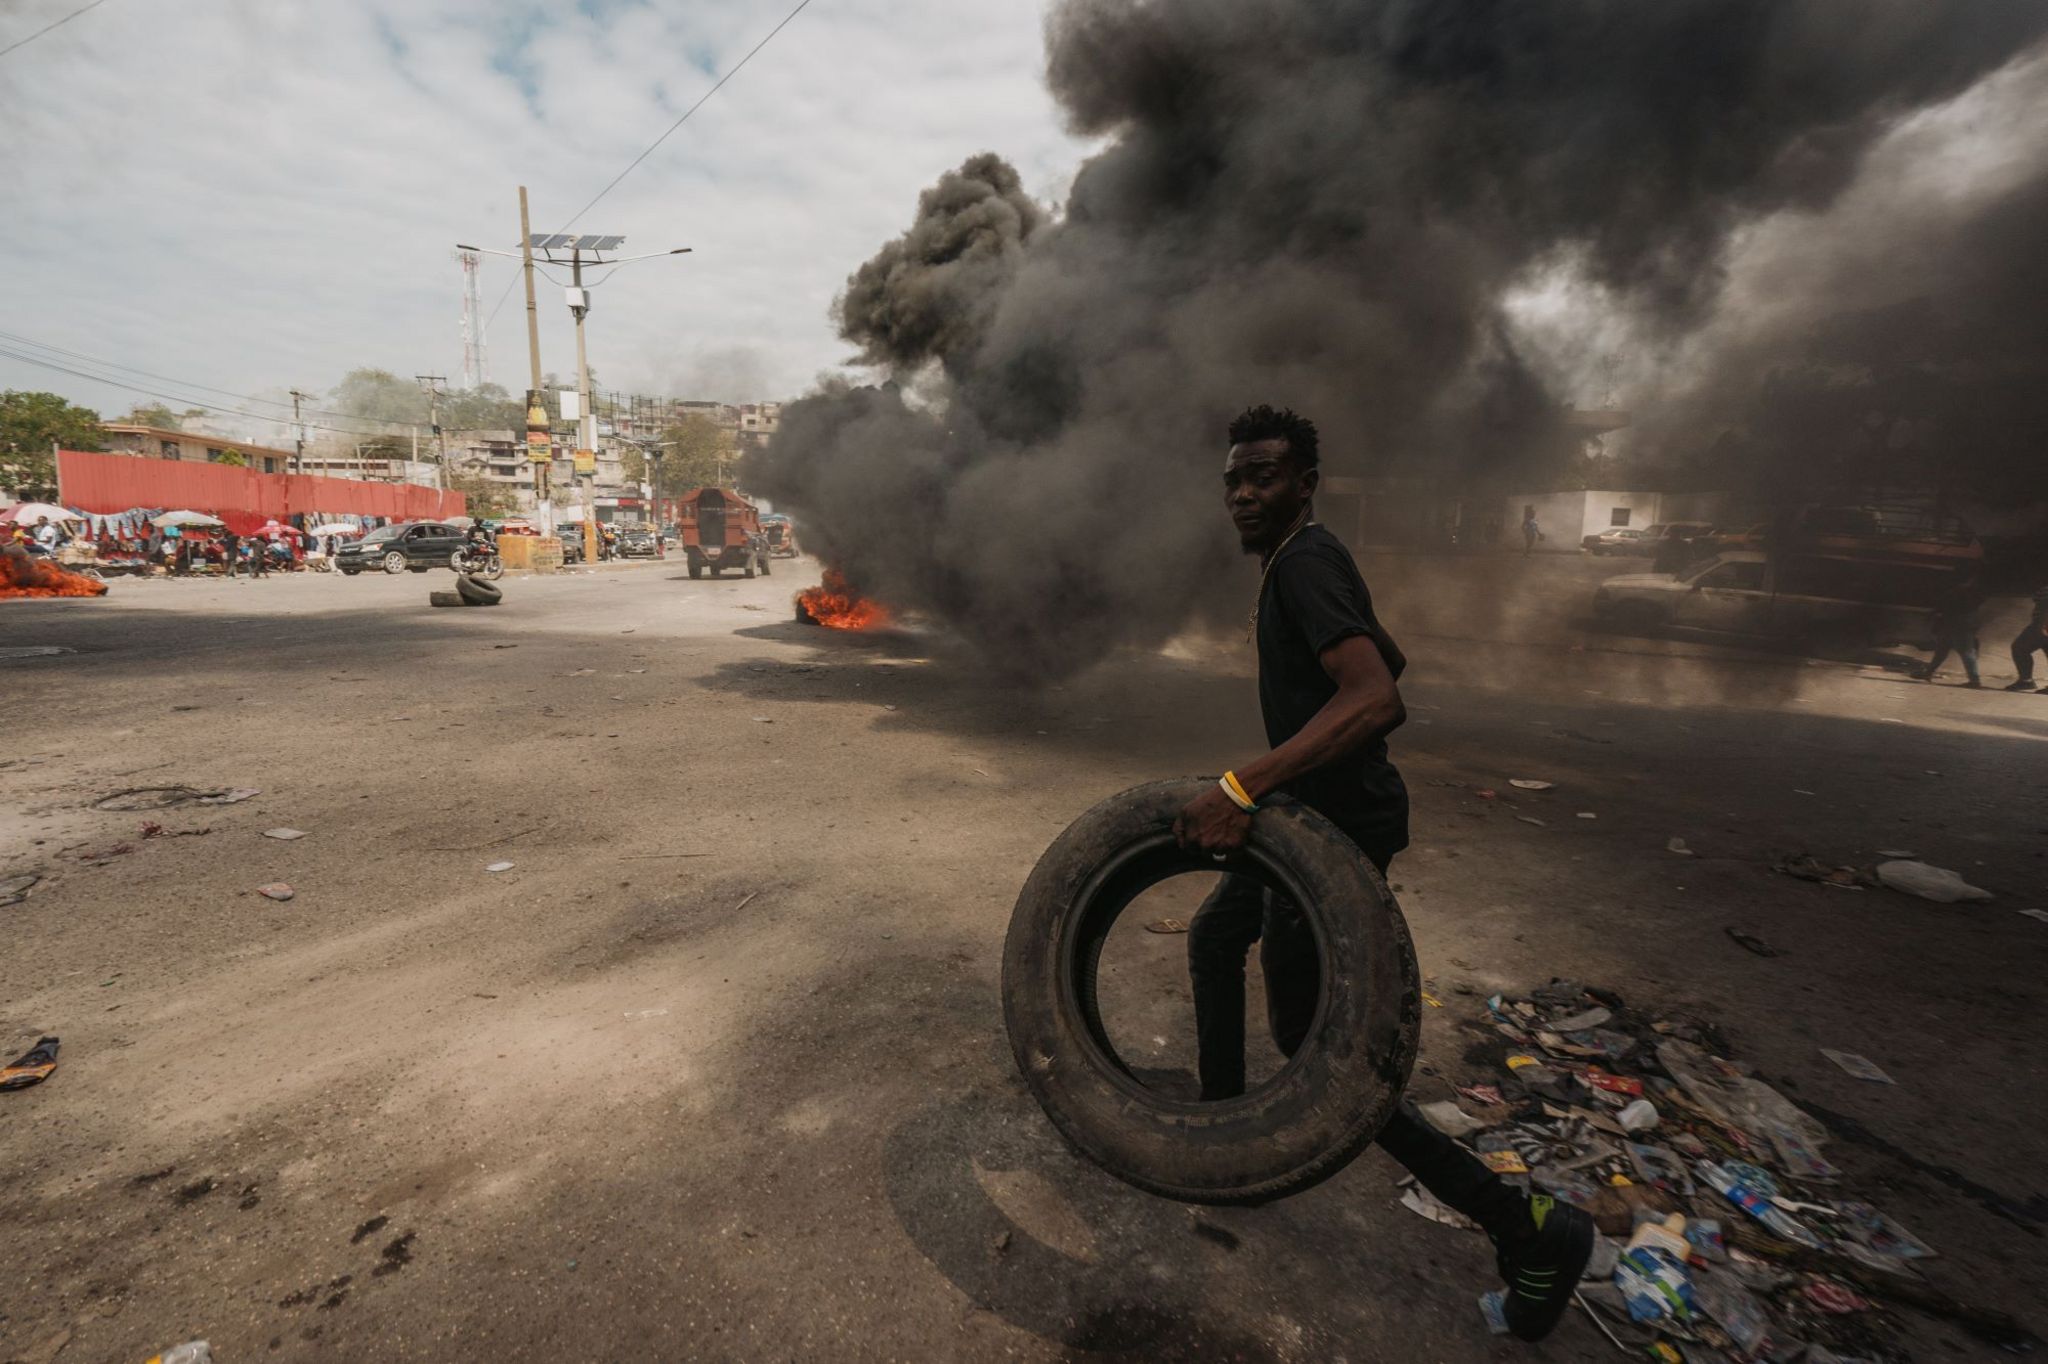 A man runs with a tyre in Port-au-Prince